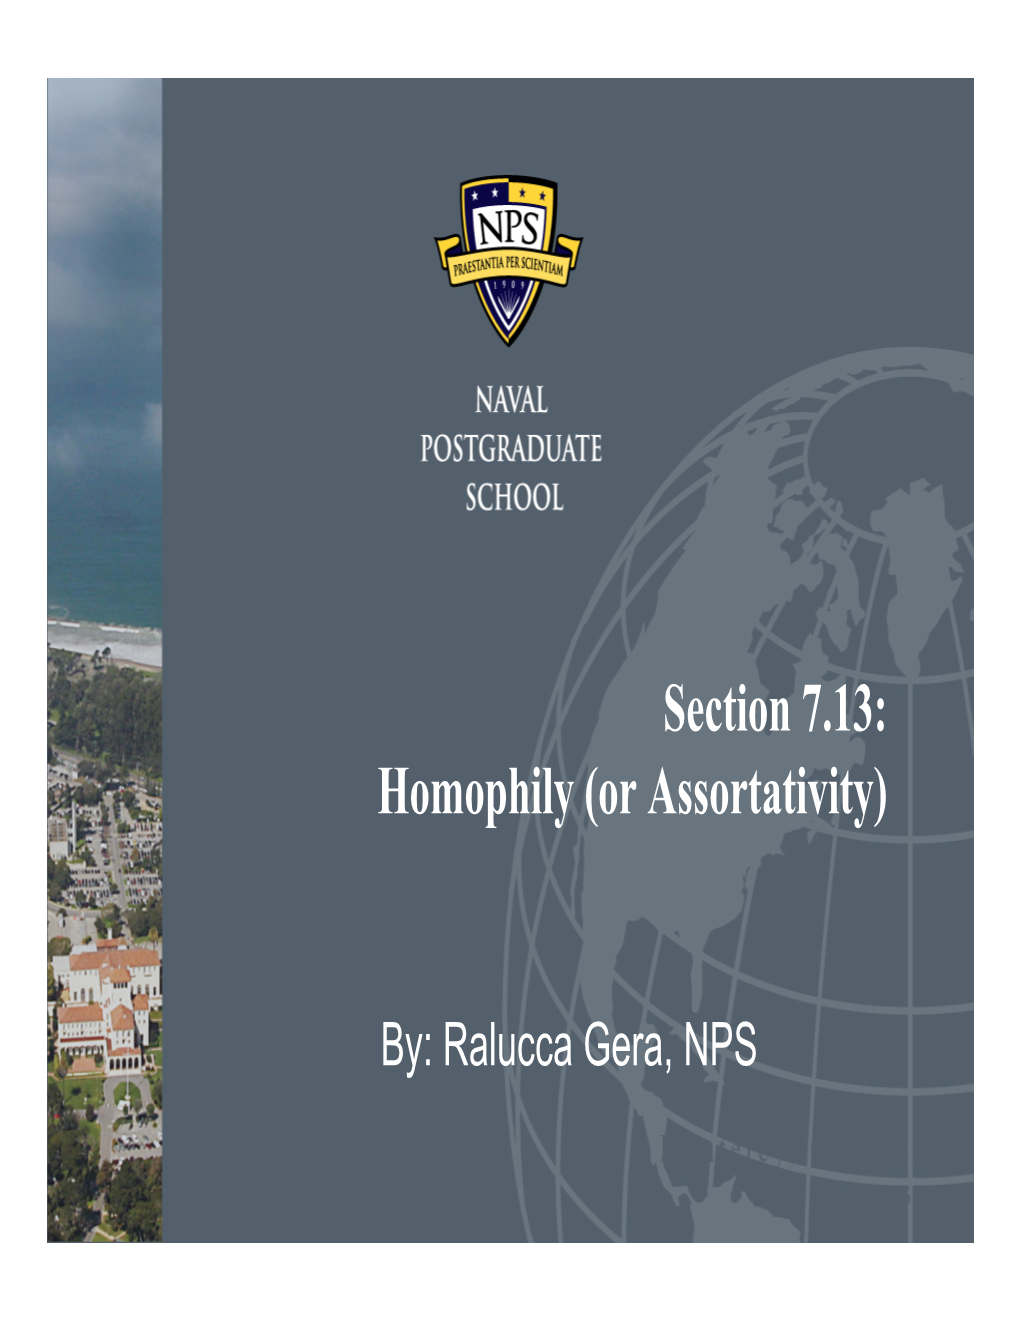 Section 7.13: Homophily (Or Assortativity)